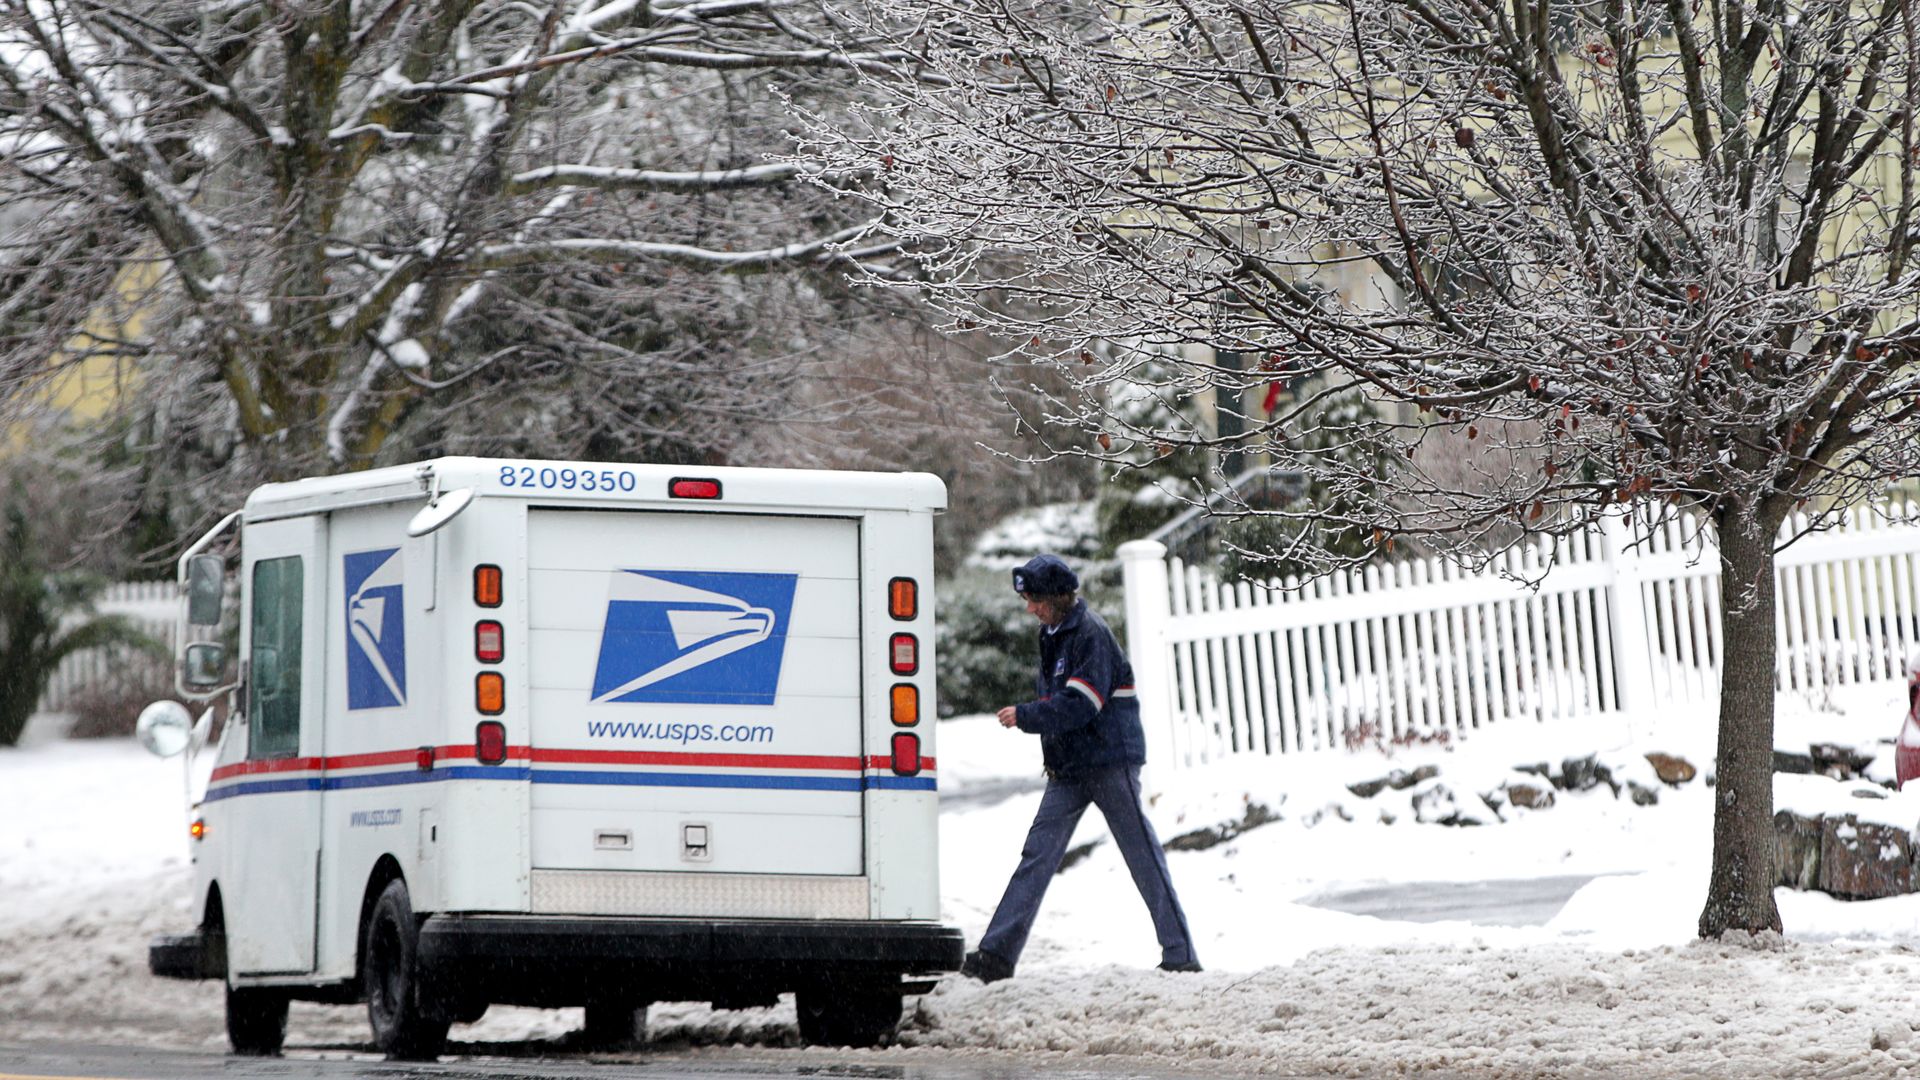 A United States Postal Service mail carrier.